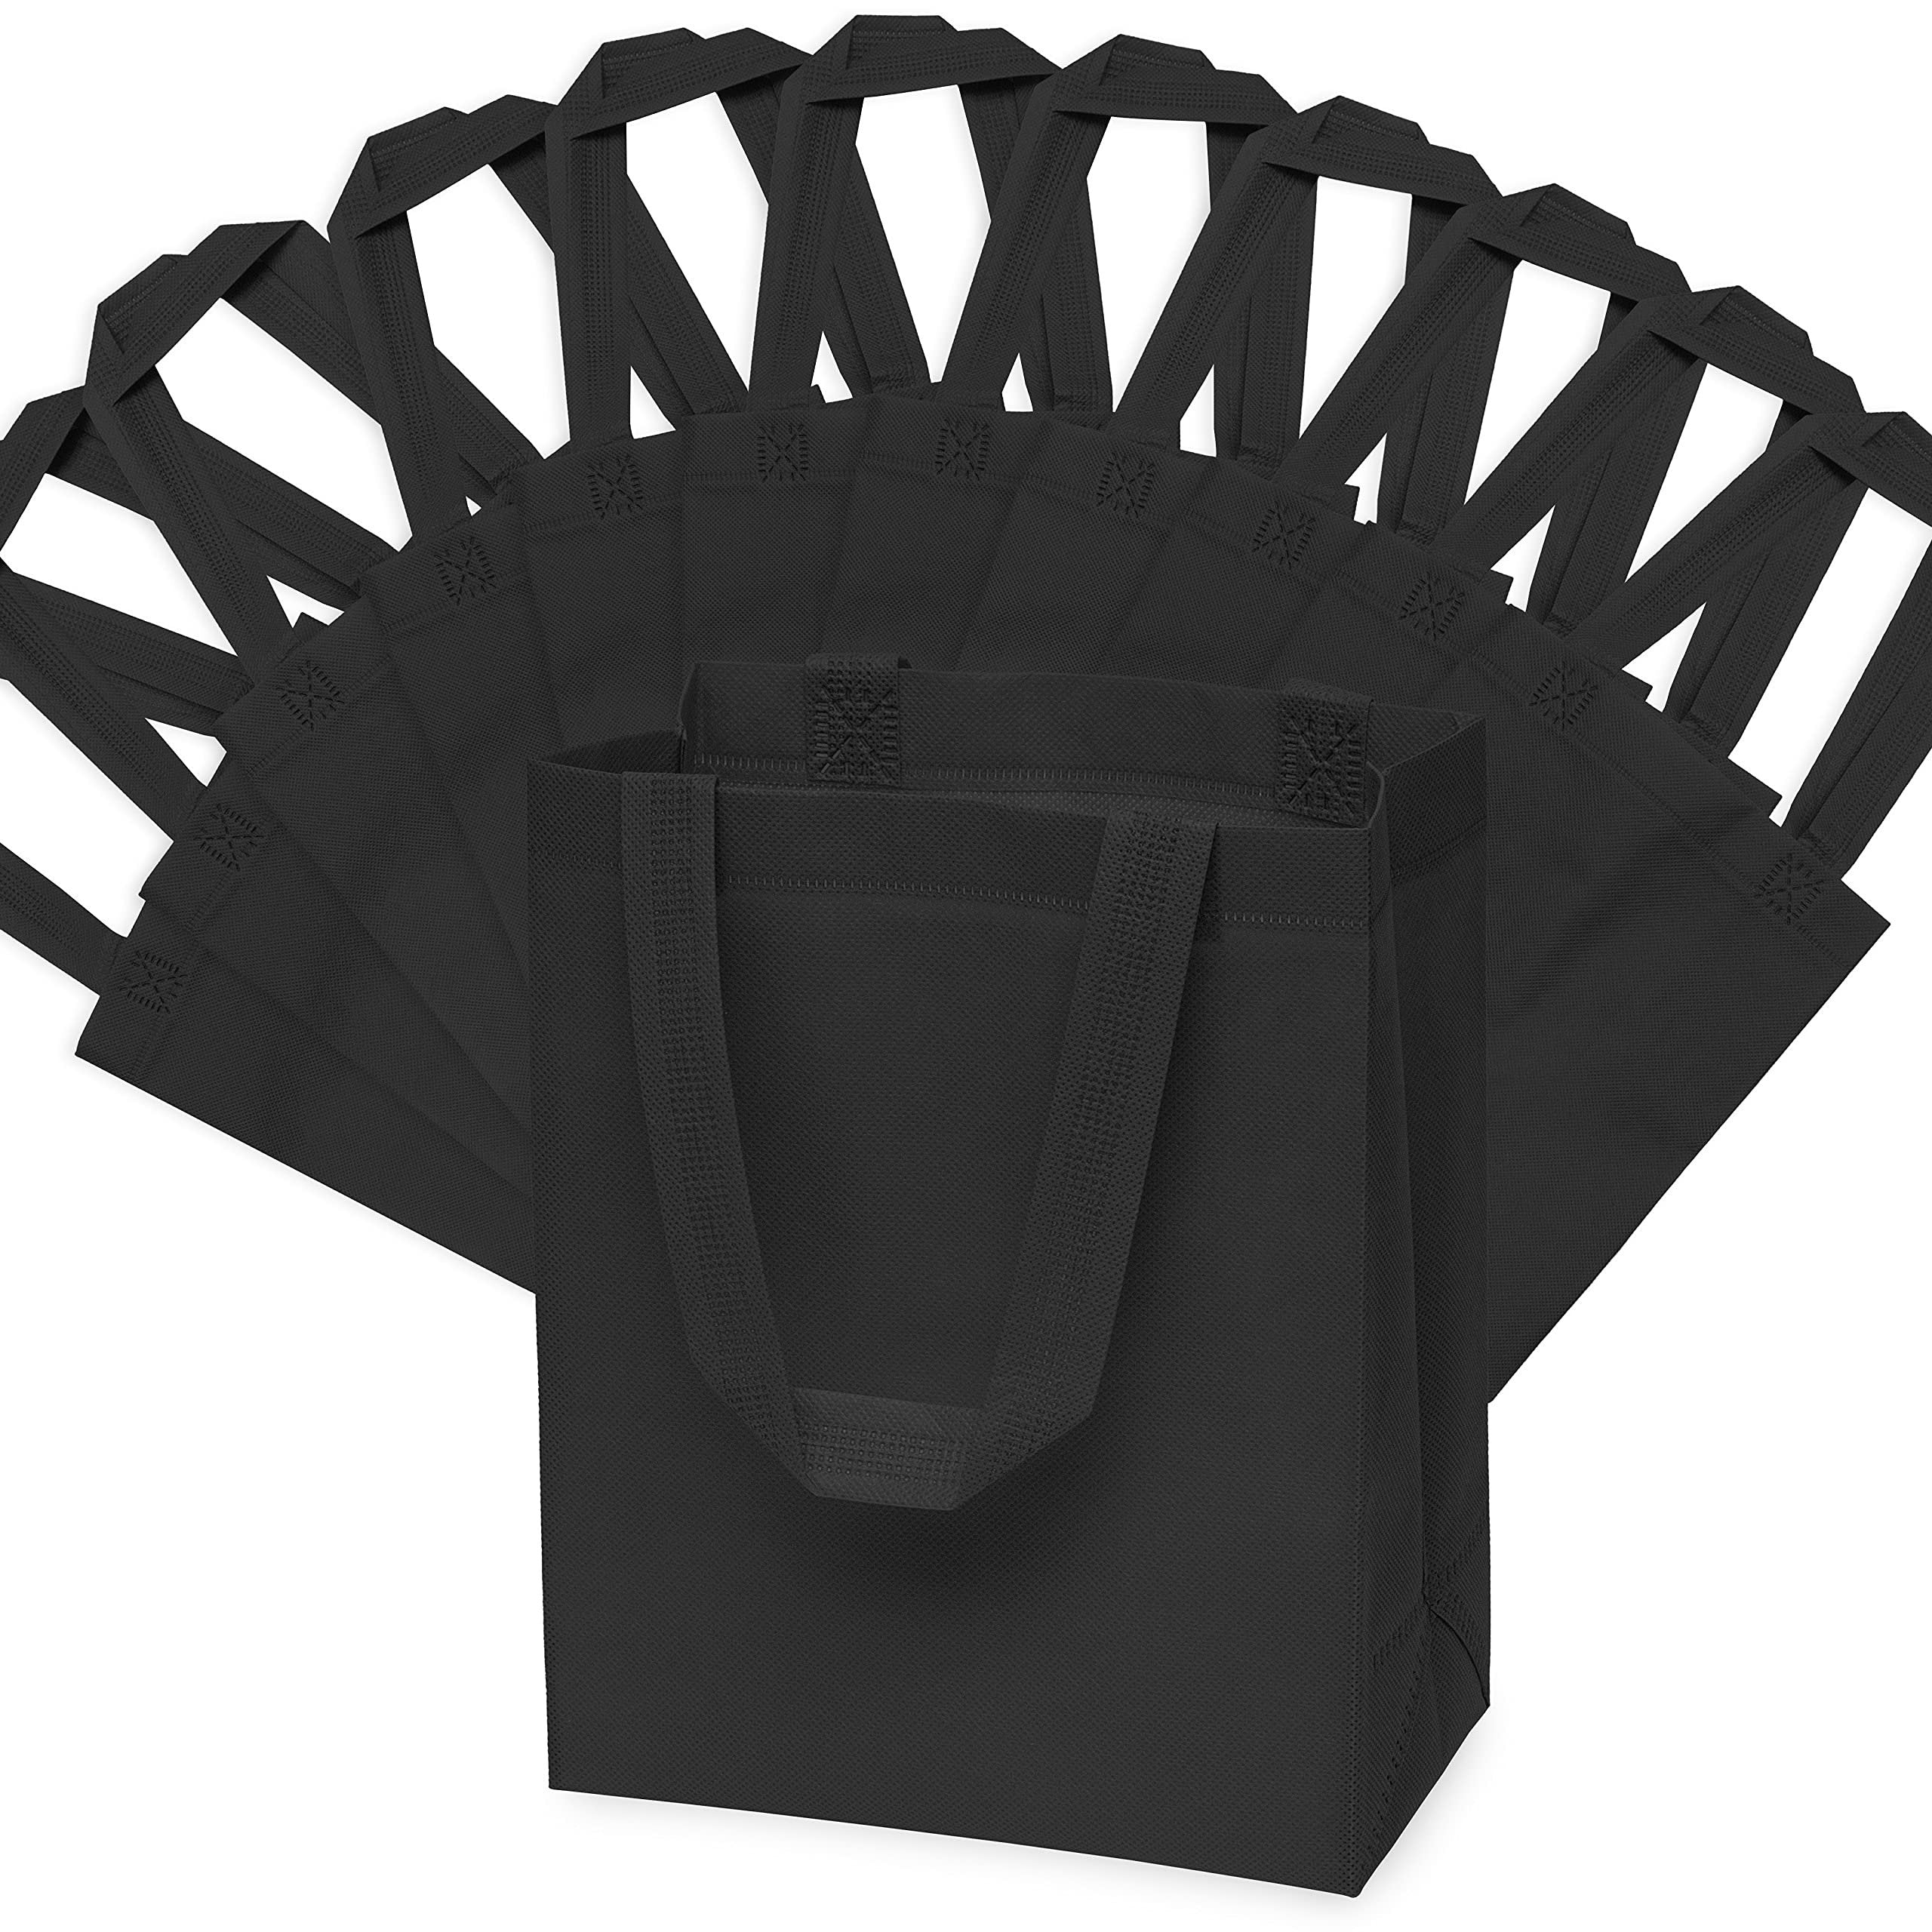 Reusable Gift Bags - 12 Pack Small Totes with Handles, Black Eco Friendly Fabric Cloth for Shopping, Merchandise, Events, Parties, Take-Out, Boutiques, Retail Stores, Small Business Bulk - 8x4x10